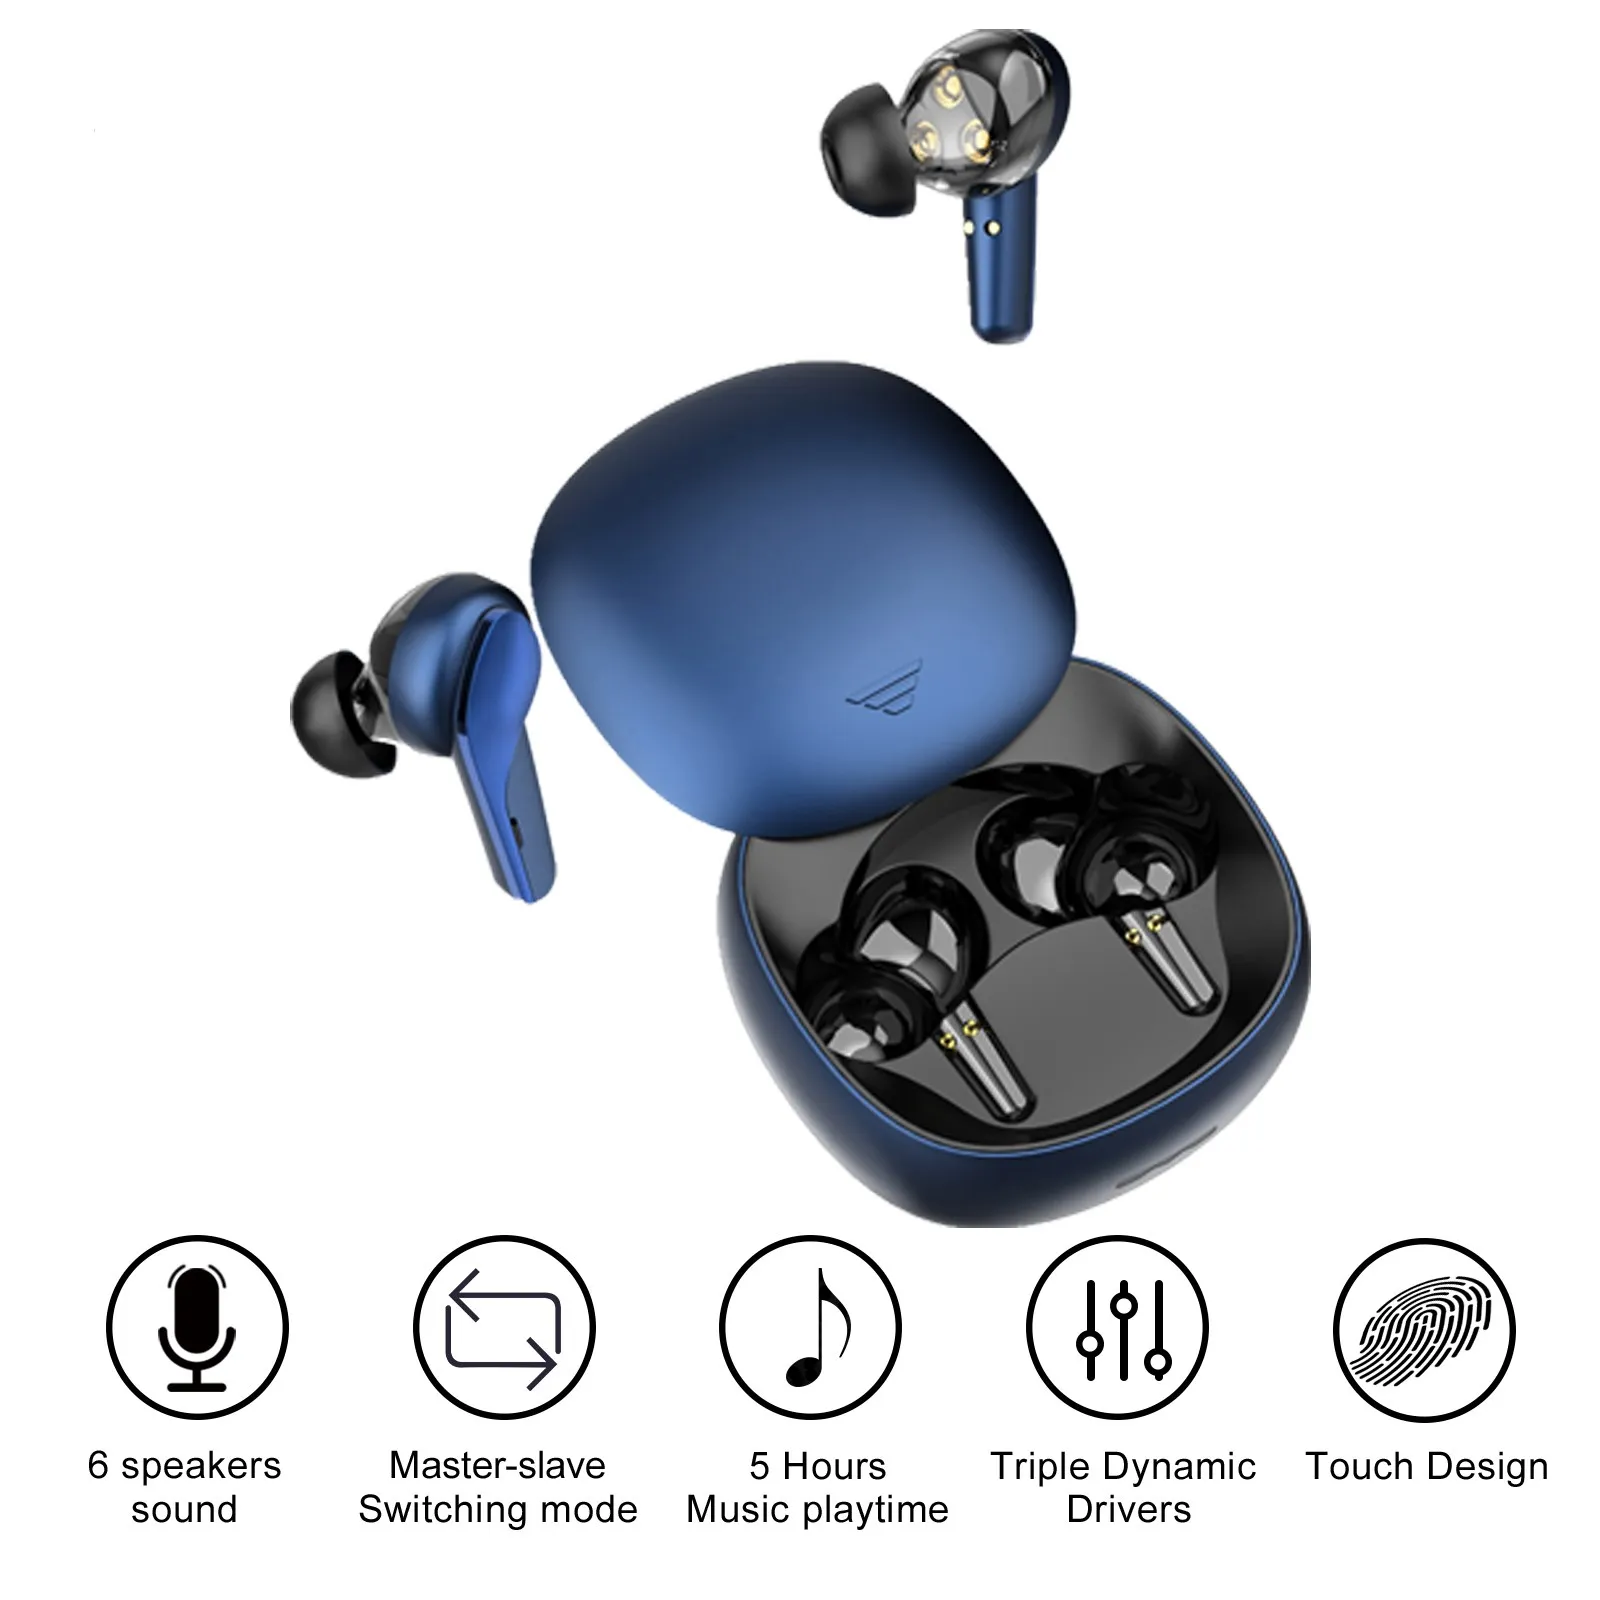 

2023 New TWS Earphones 5 hours True Wireless Stereo Earbuds Master-Slave Switching Mode Touch Headset 350mAh Recommend